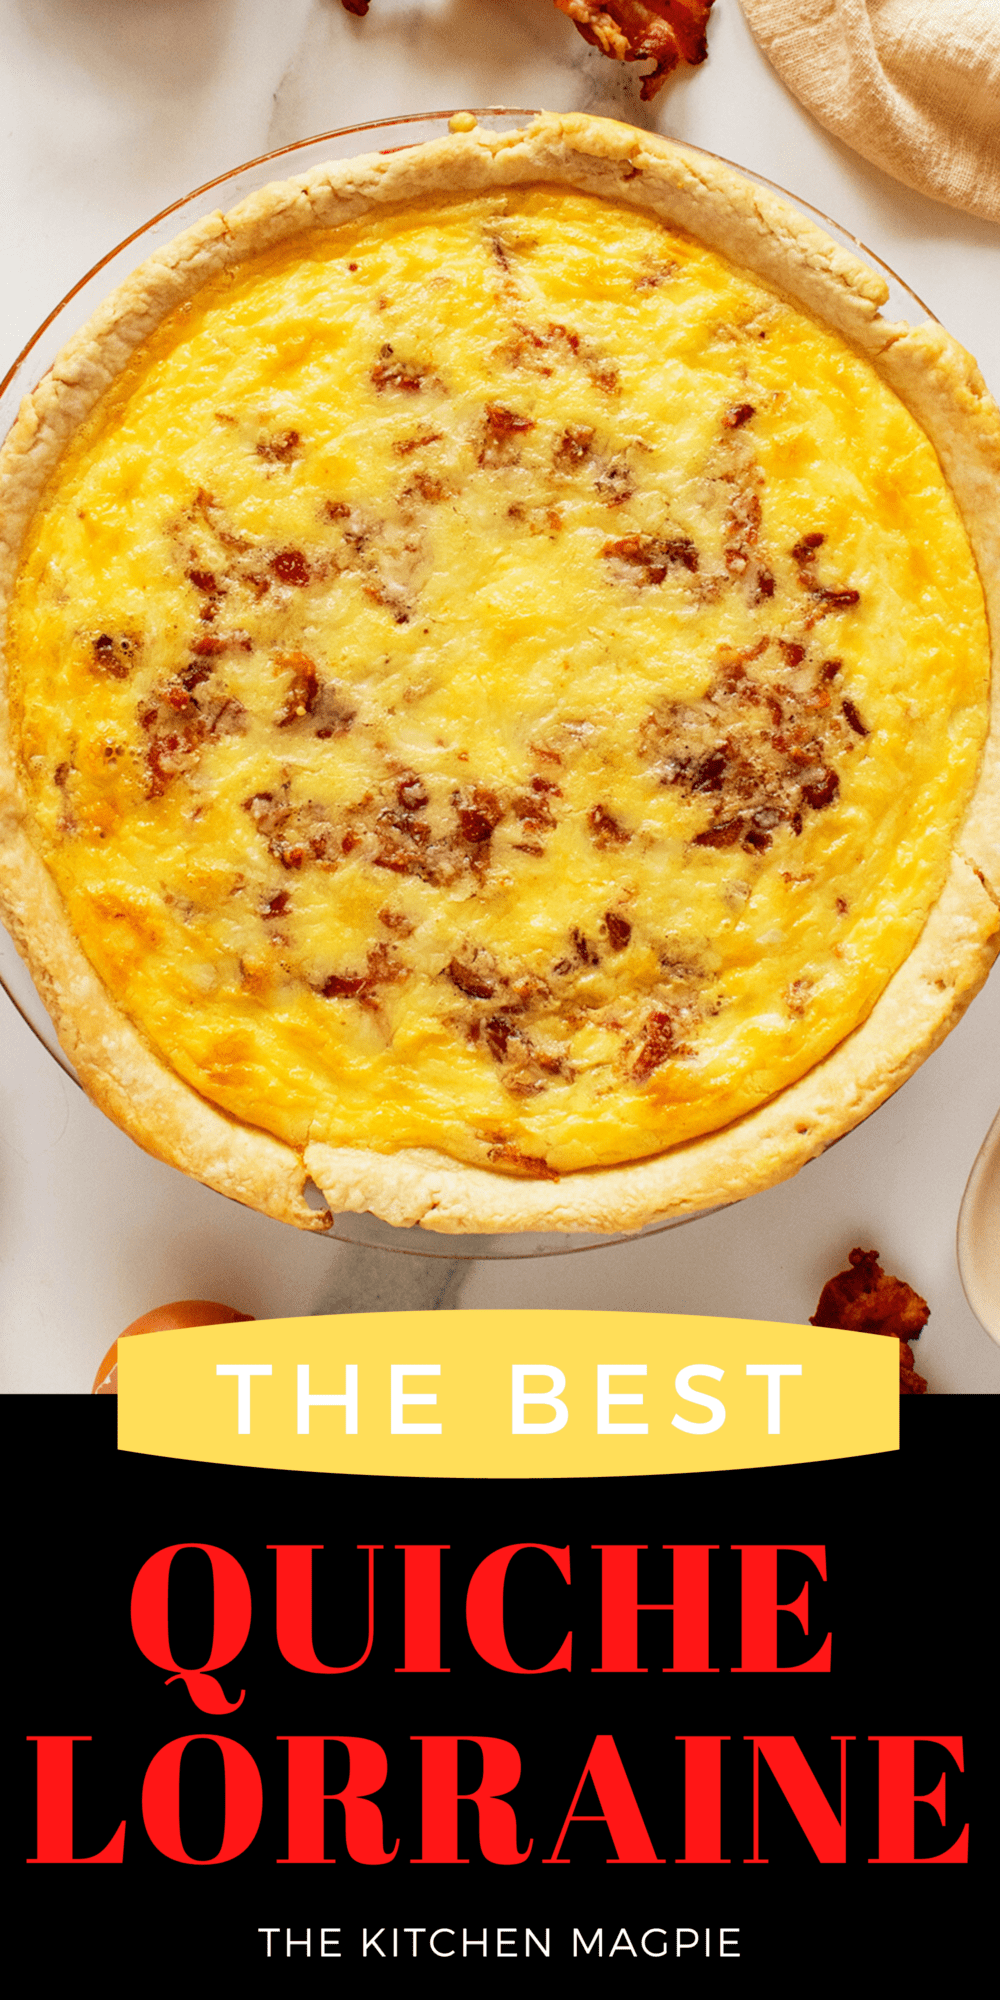 This Quiche Lorraine recipe is actually a super simple and surprisingly quick way to make a tasty and filling lunch for any occasion.